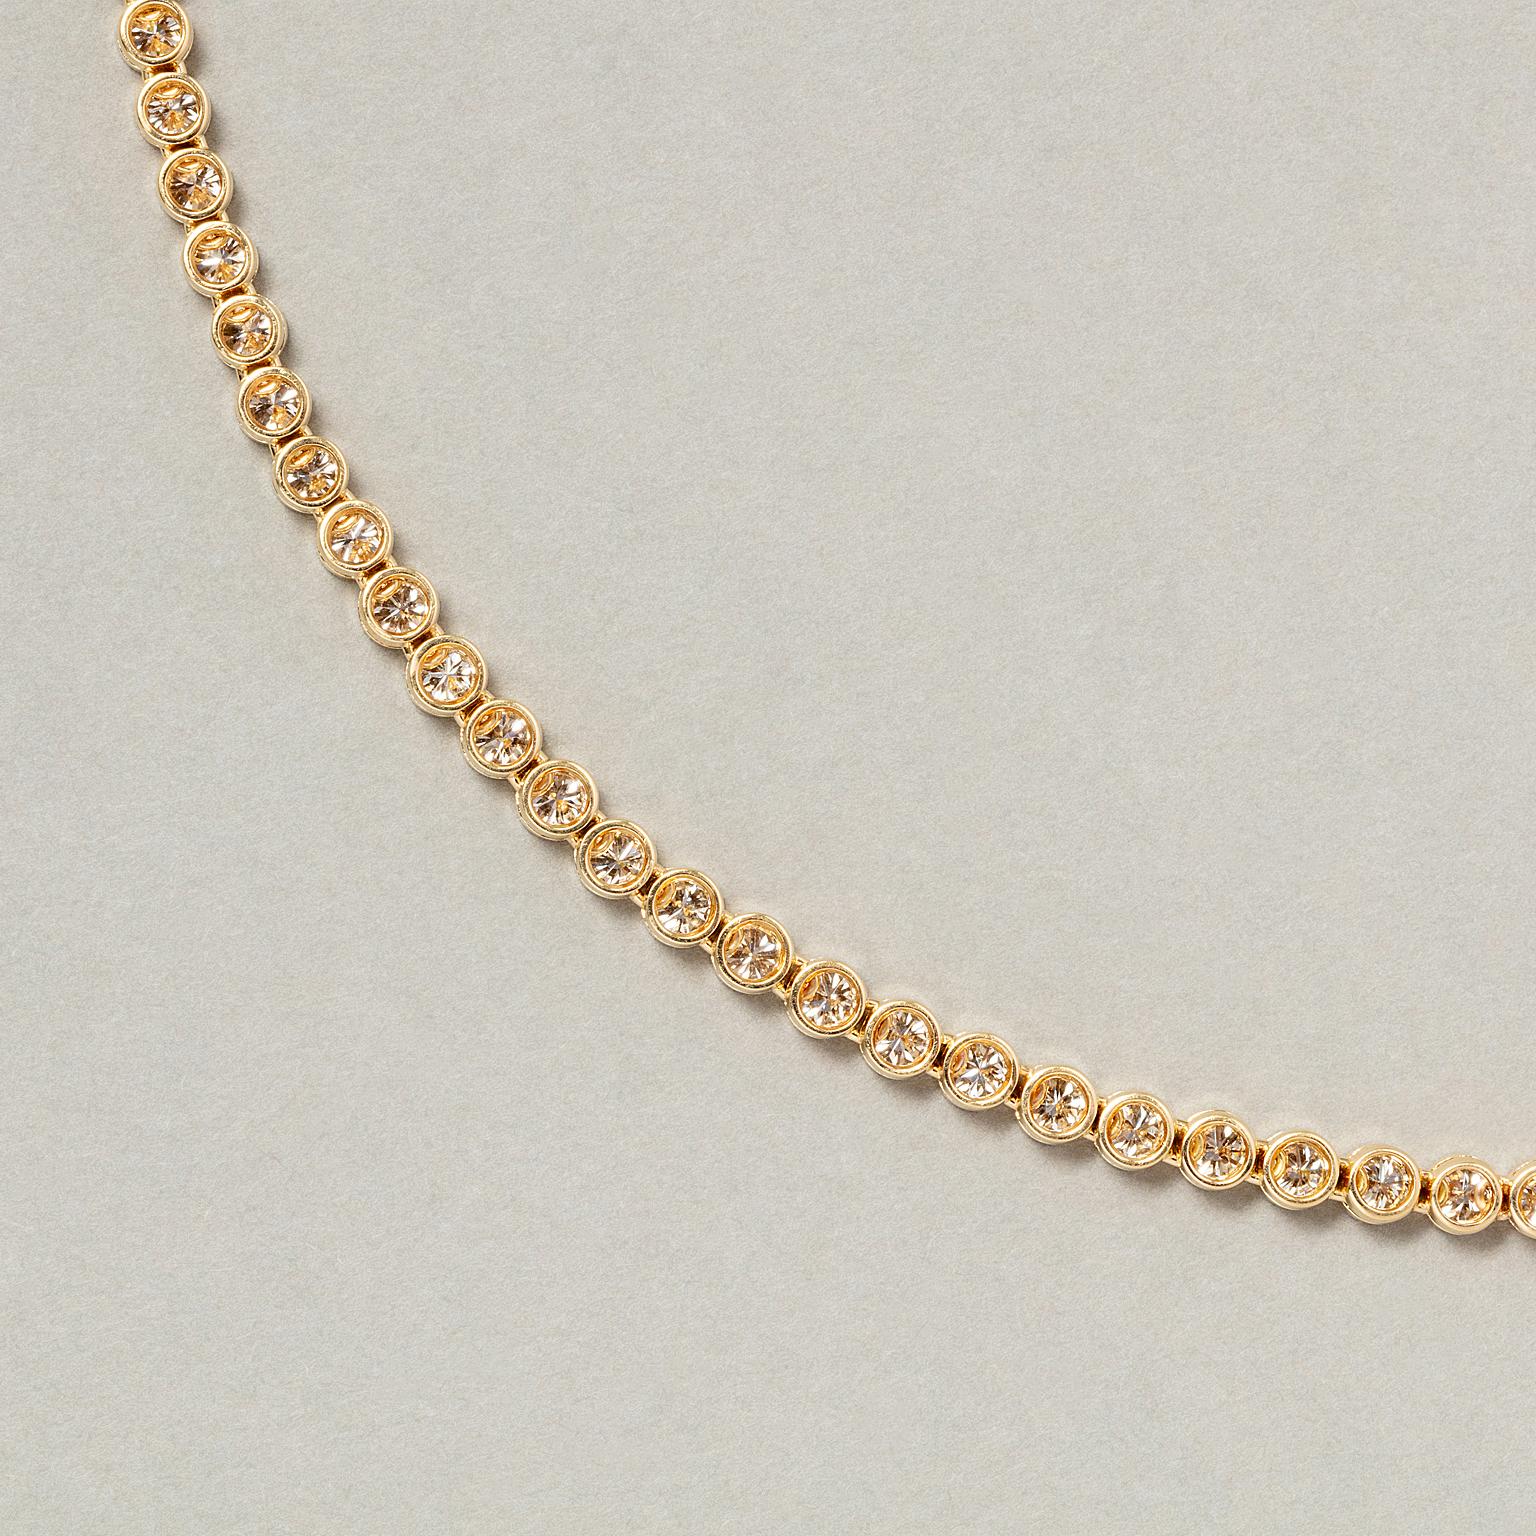 An 18 Carat Gold Bulgari Necklace with Diamonds In Excellent Condition For Sale In Amsterdam, NL